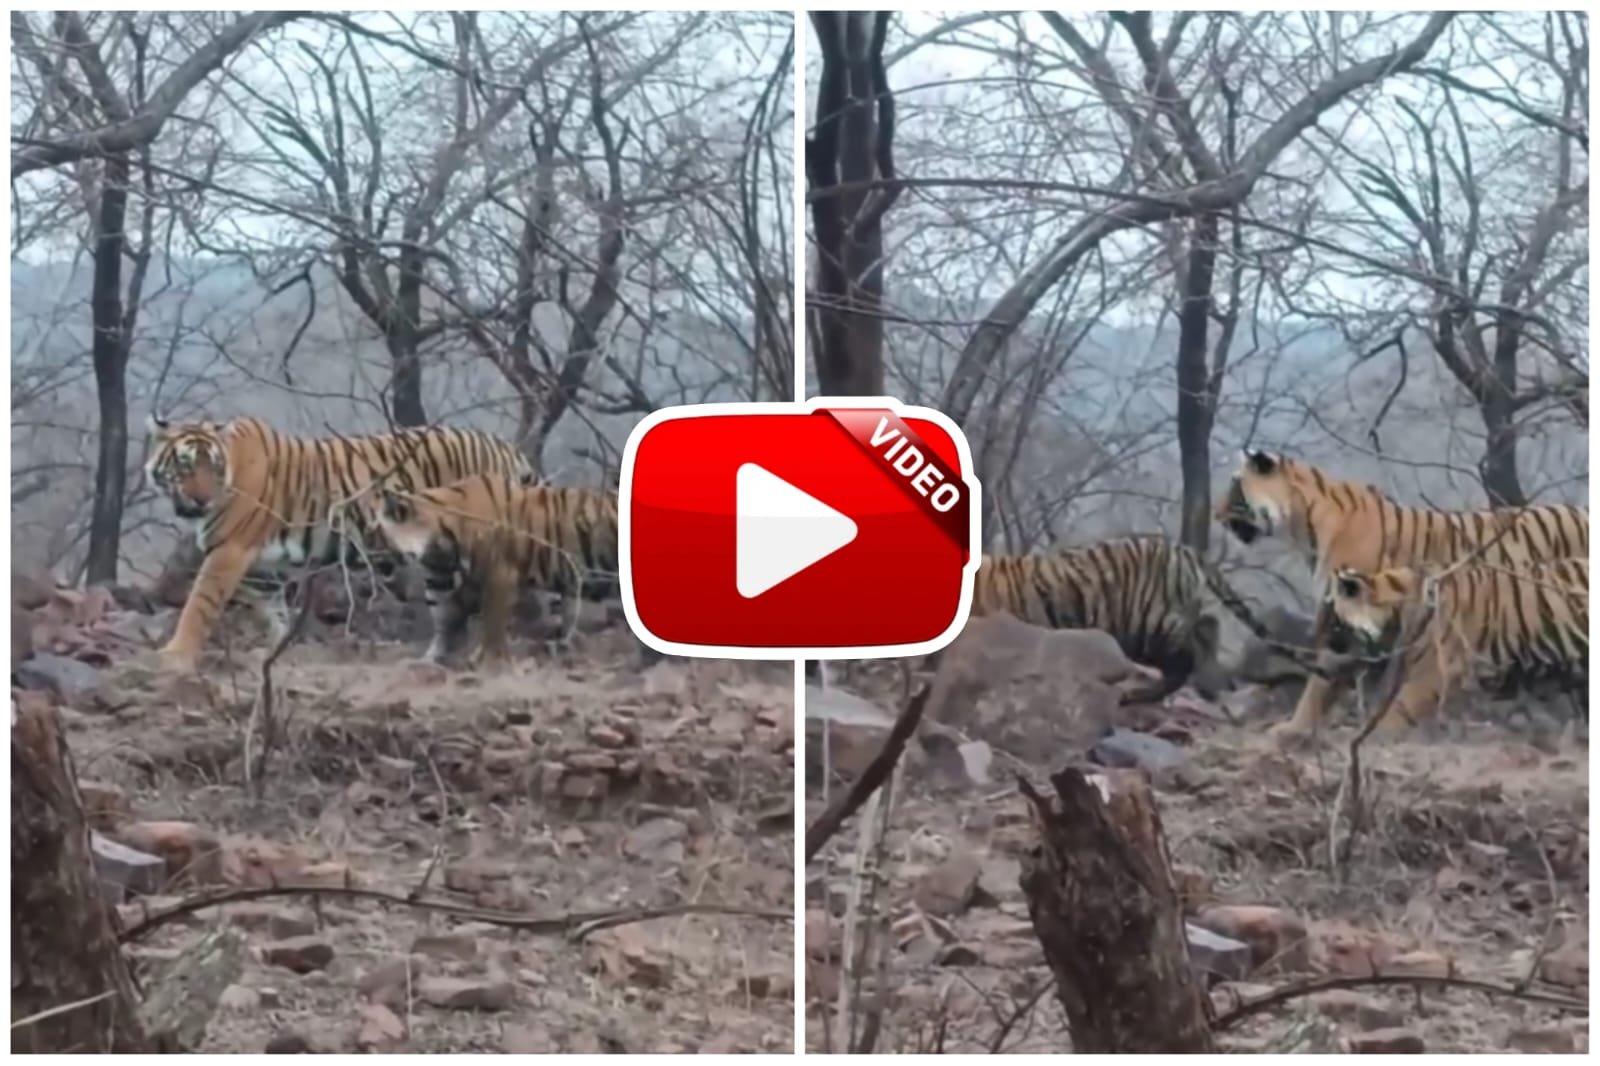 Garden Video | Everyone was surprised to see the tigress roaming with her cubs in the forest.